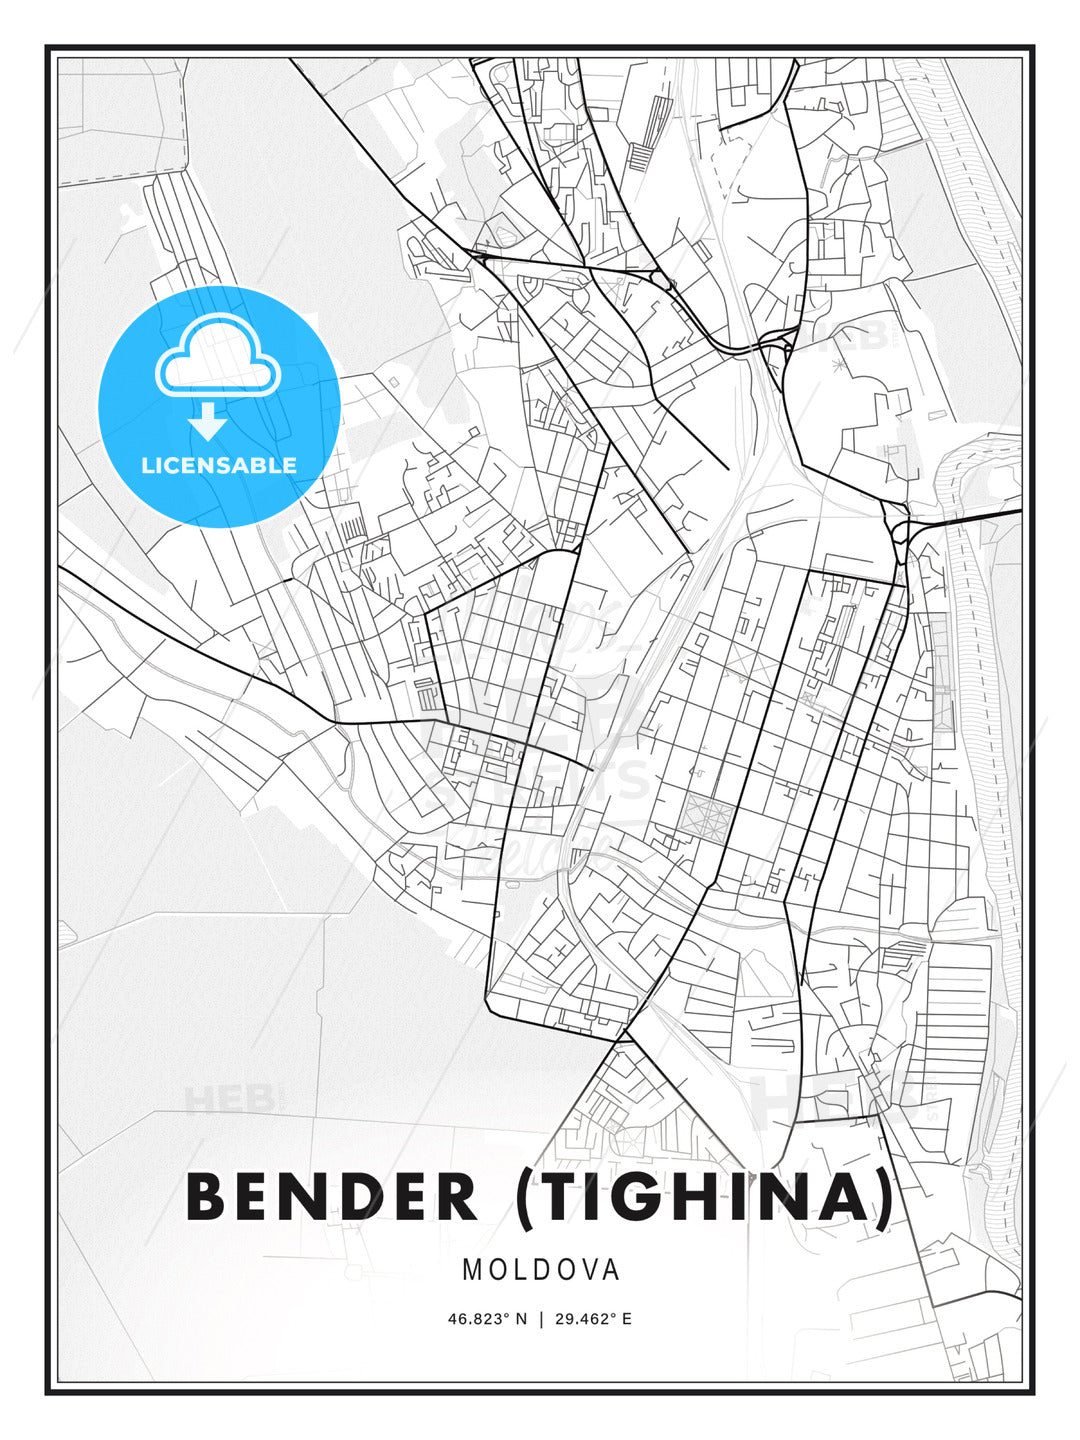 Bender (Tighina), Moldova, Modern Print Template in Various Formats - HEBSTREITS Sketches